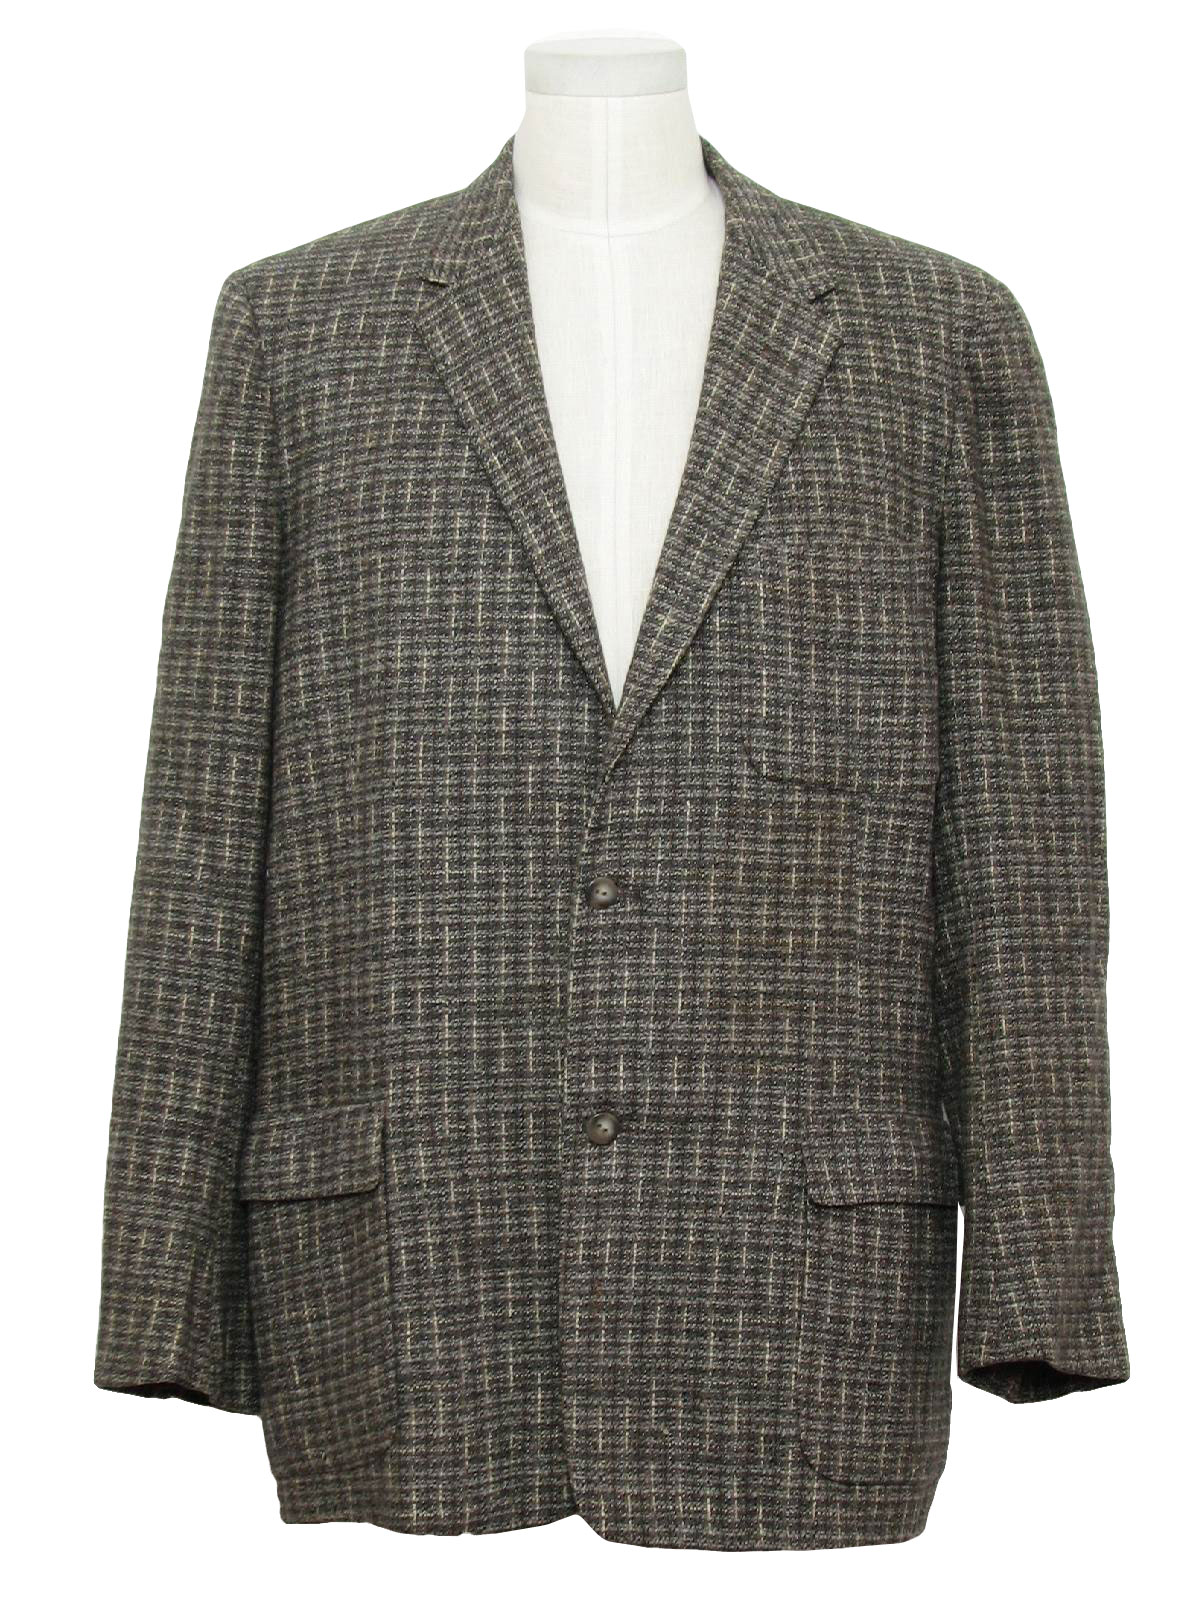 Penneys Fifties Vintage Jacket: 50s -Penneys- Mens cream charcoal gray ...